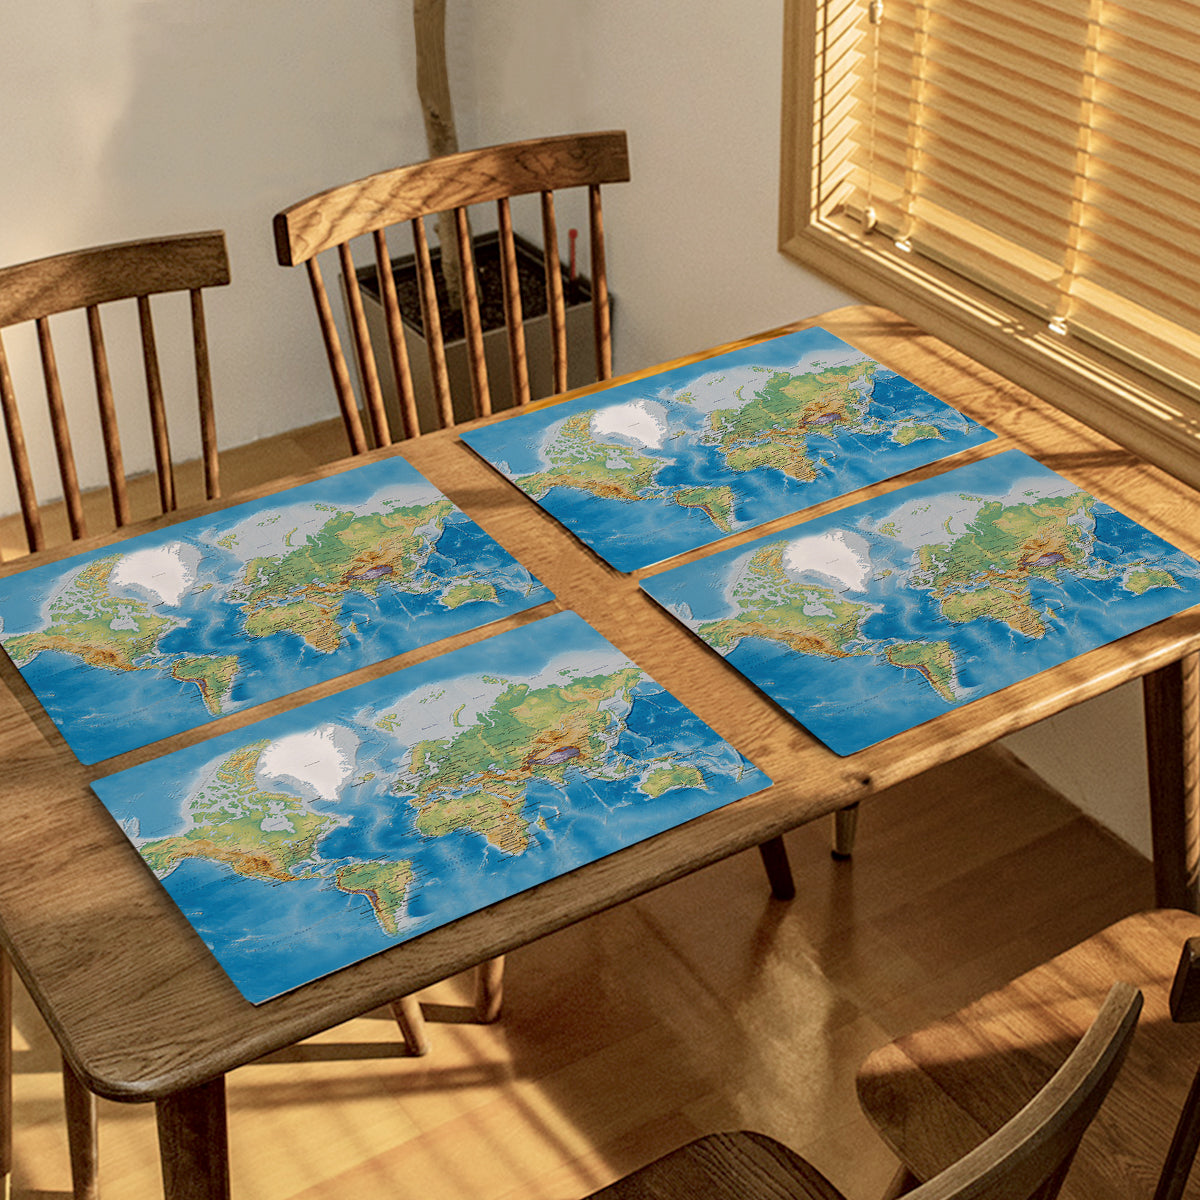 The Seven Seas Table Placemat